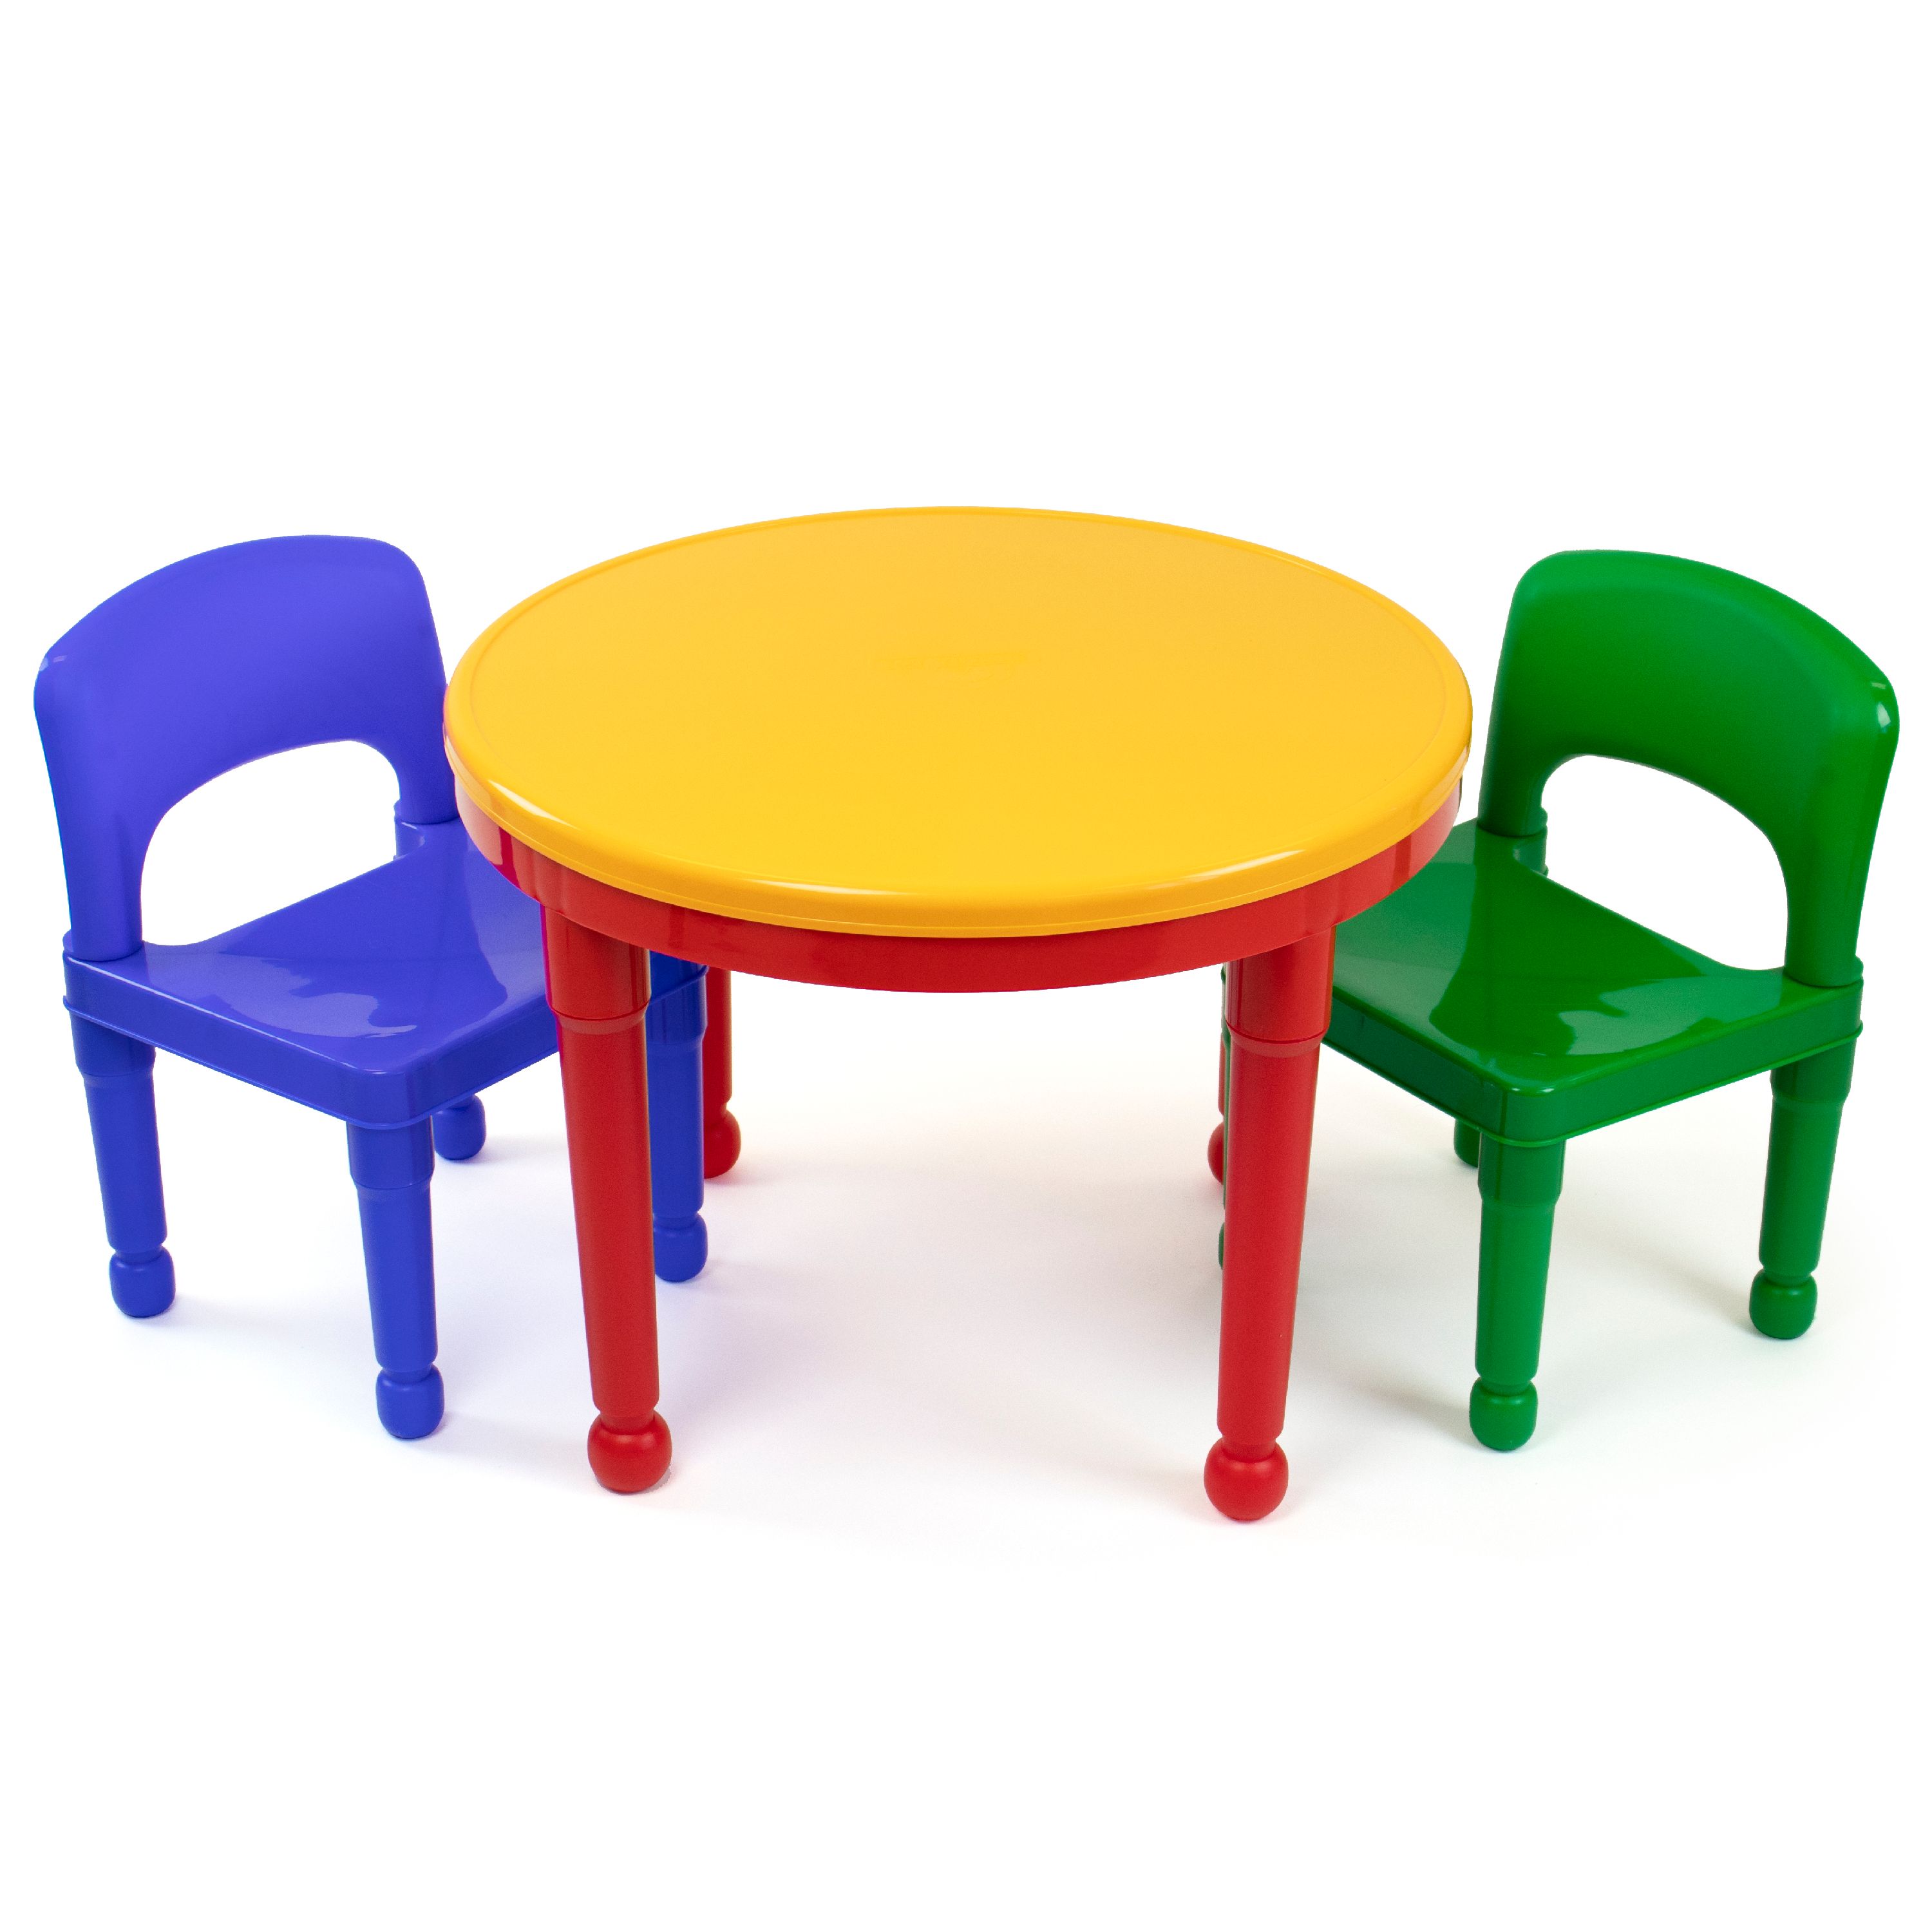 Humble Crew Kids 2-in-1 Plastic Dry Erase and Activity Table and 2 Chairs Set, Red, Green & Blue - image 3 of 8